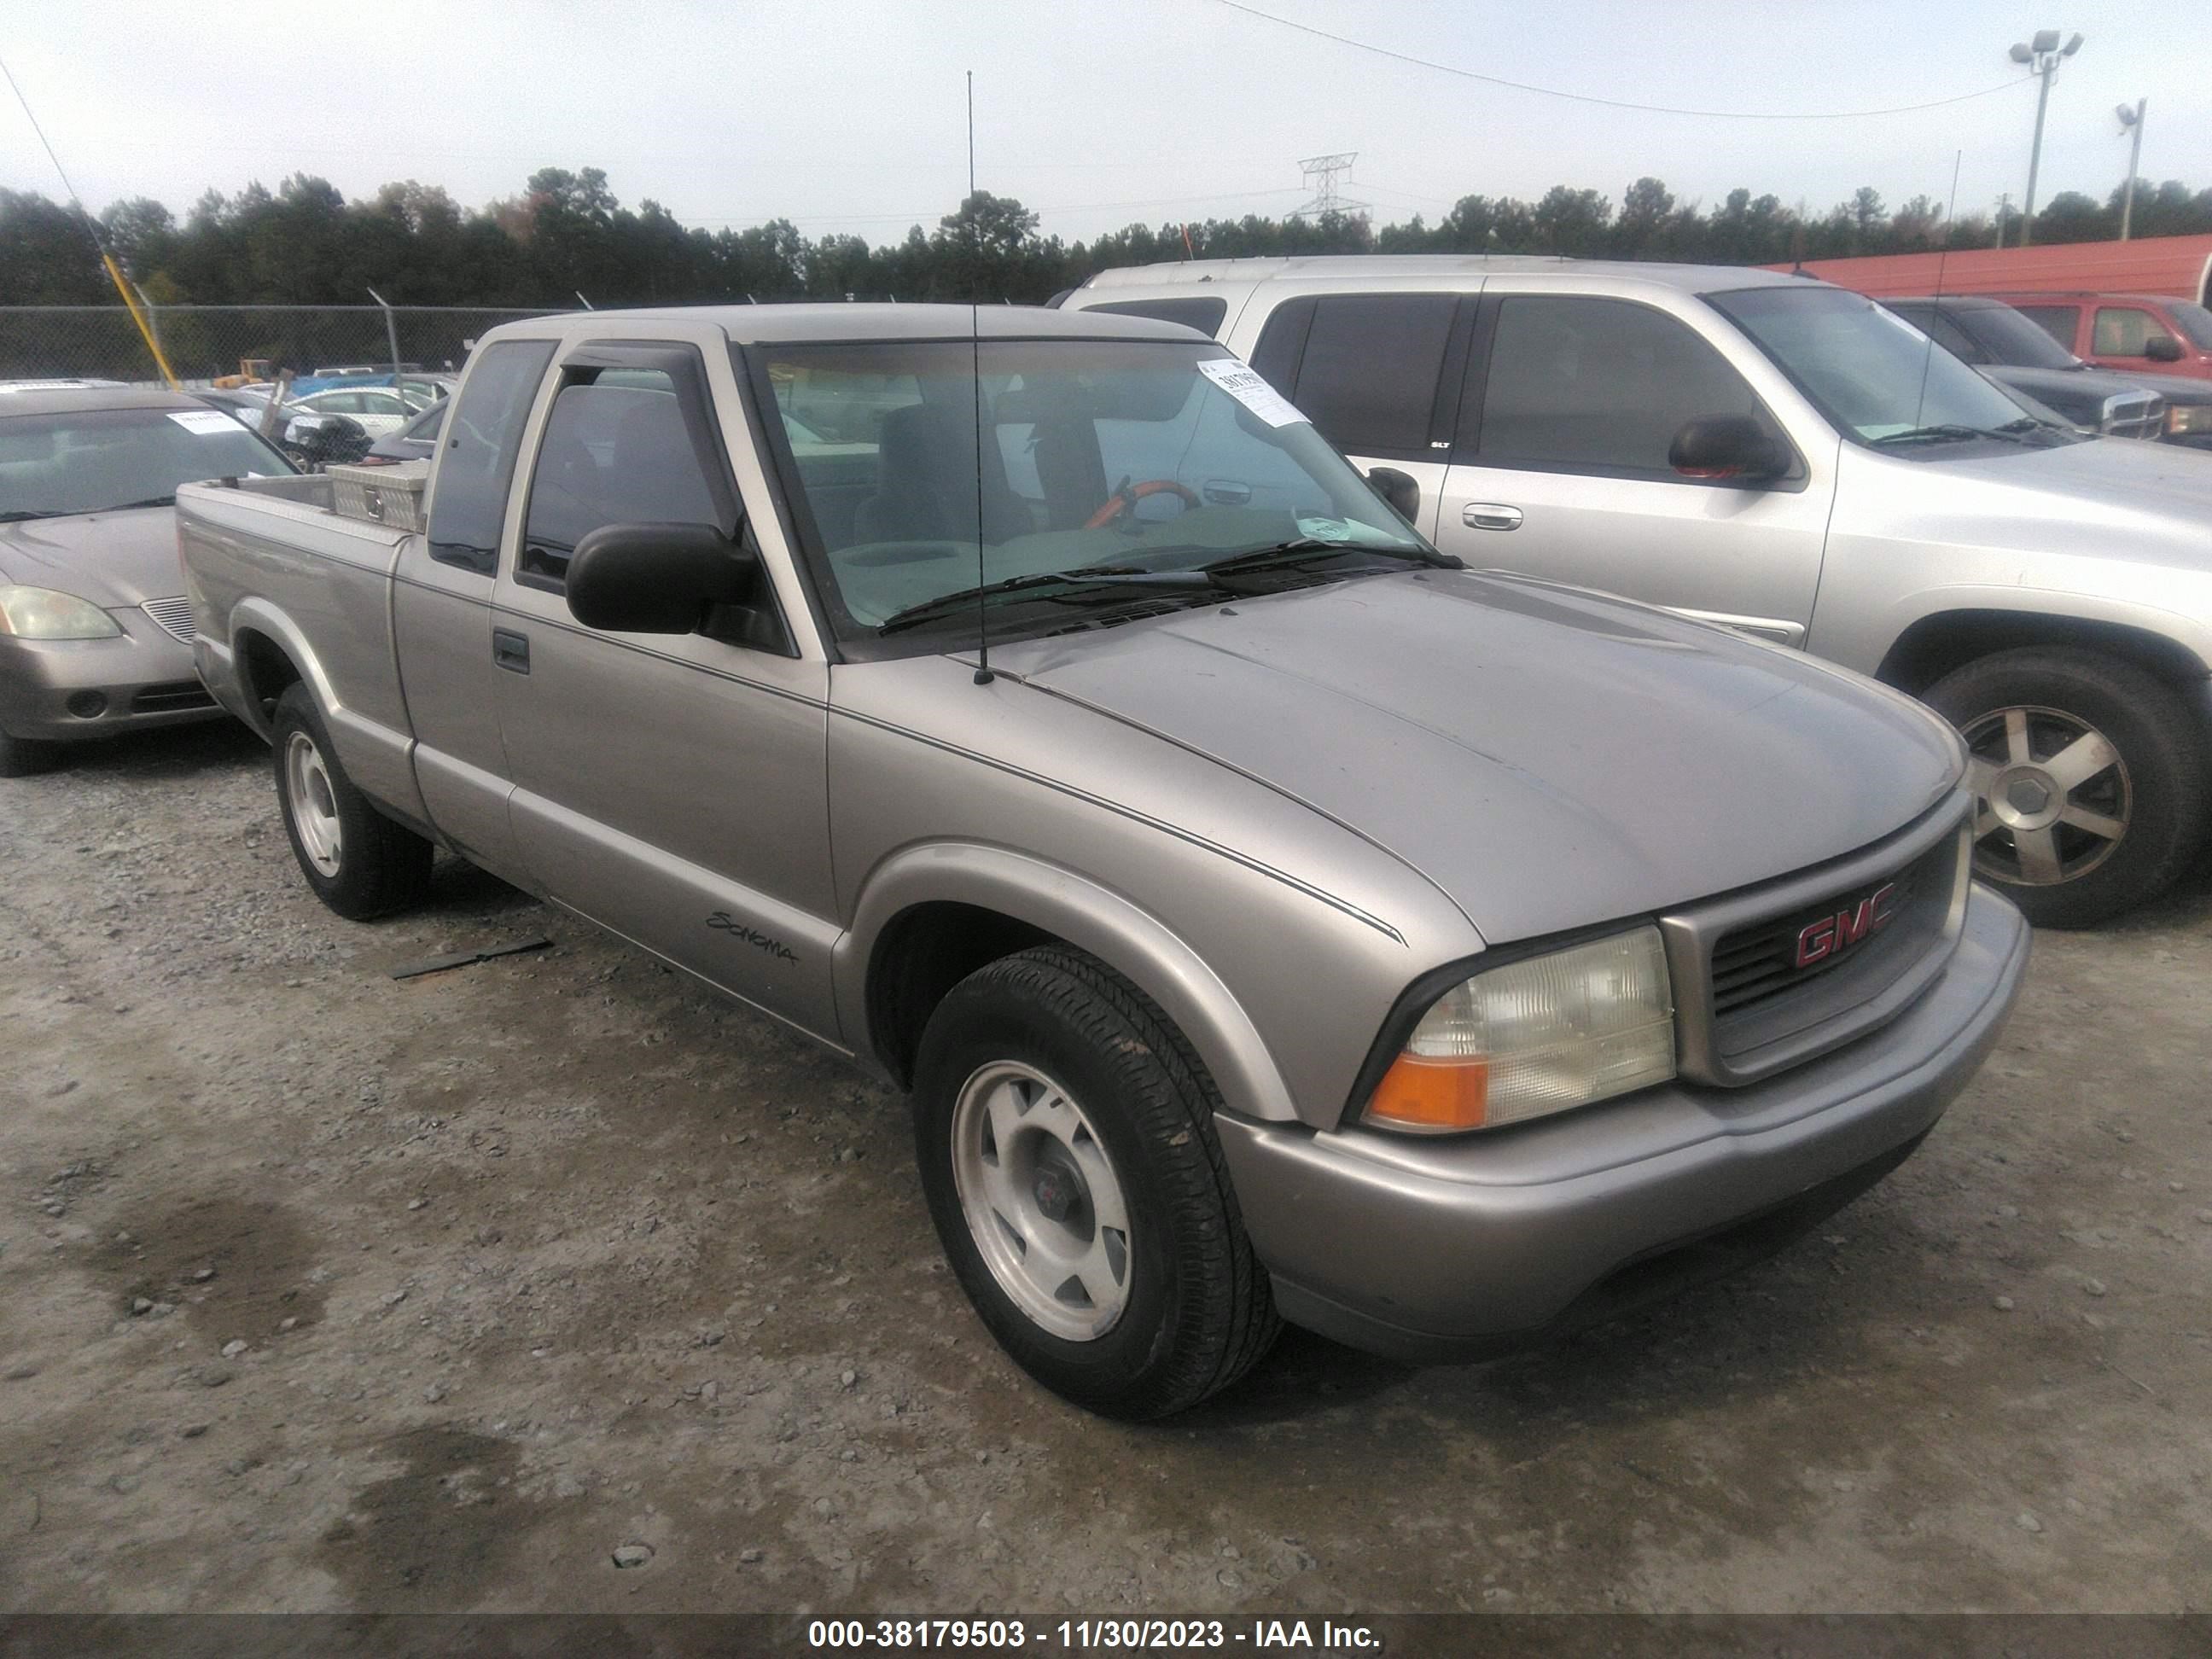 vin: 1GTCS1945WK525667 1GTCS1945WK525667 1998 gmc sonoma 2200 for Sale in 31326, 348 Commerce Dr, Rincon, USA